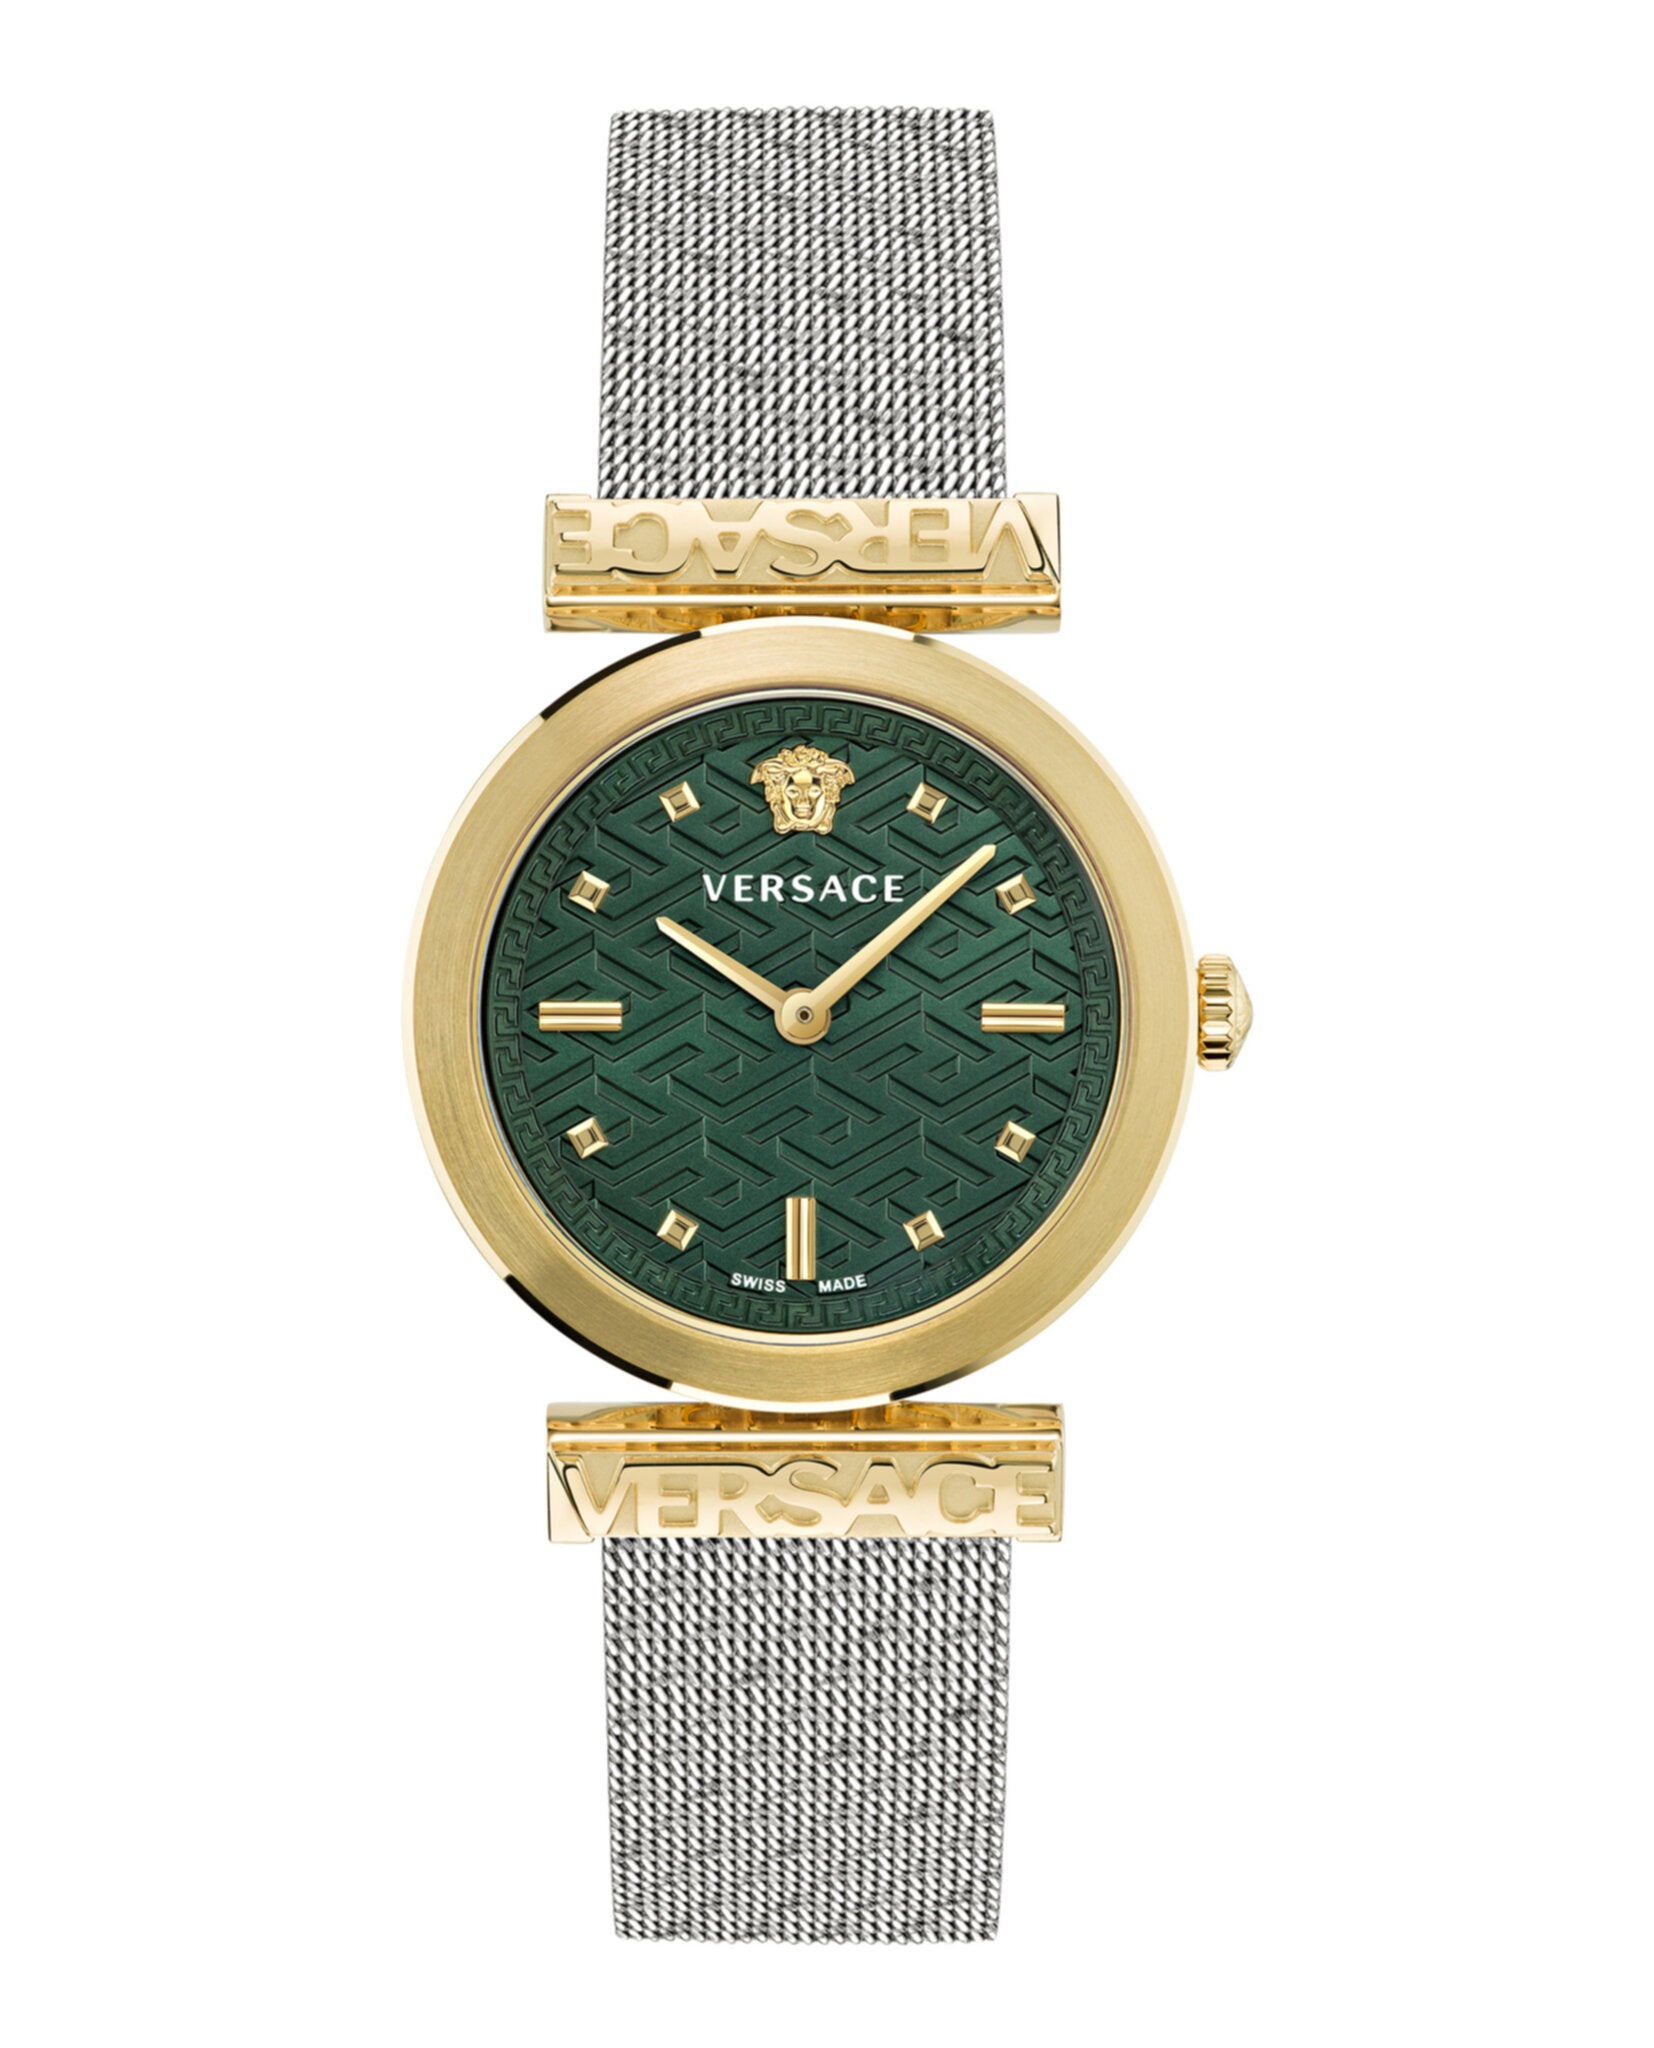 Womens Regalia MadaLuxe | Versace Versace Watches Madaluxe – Time Time